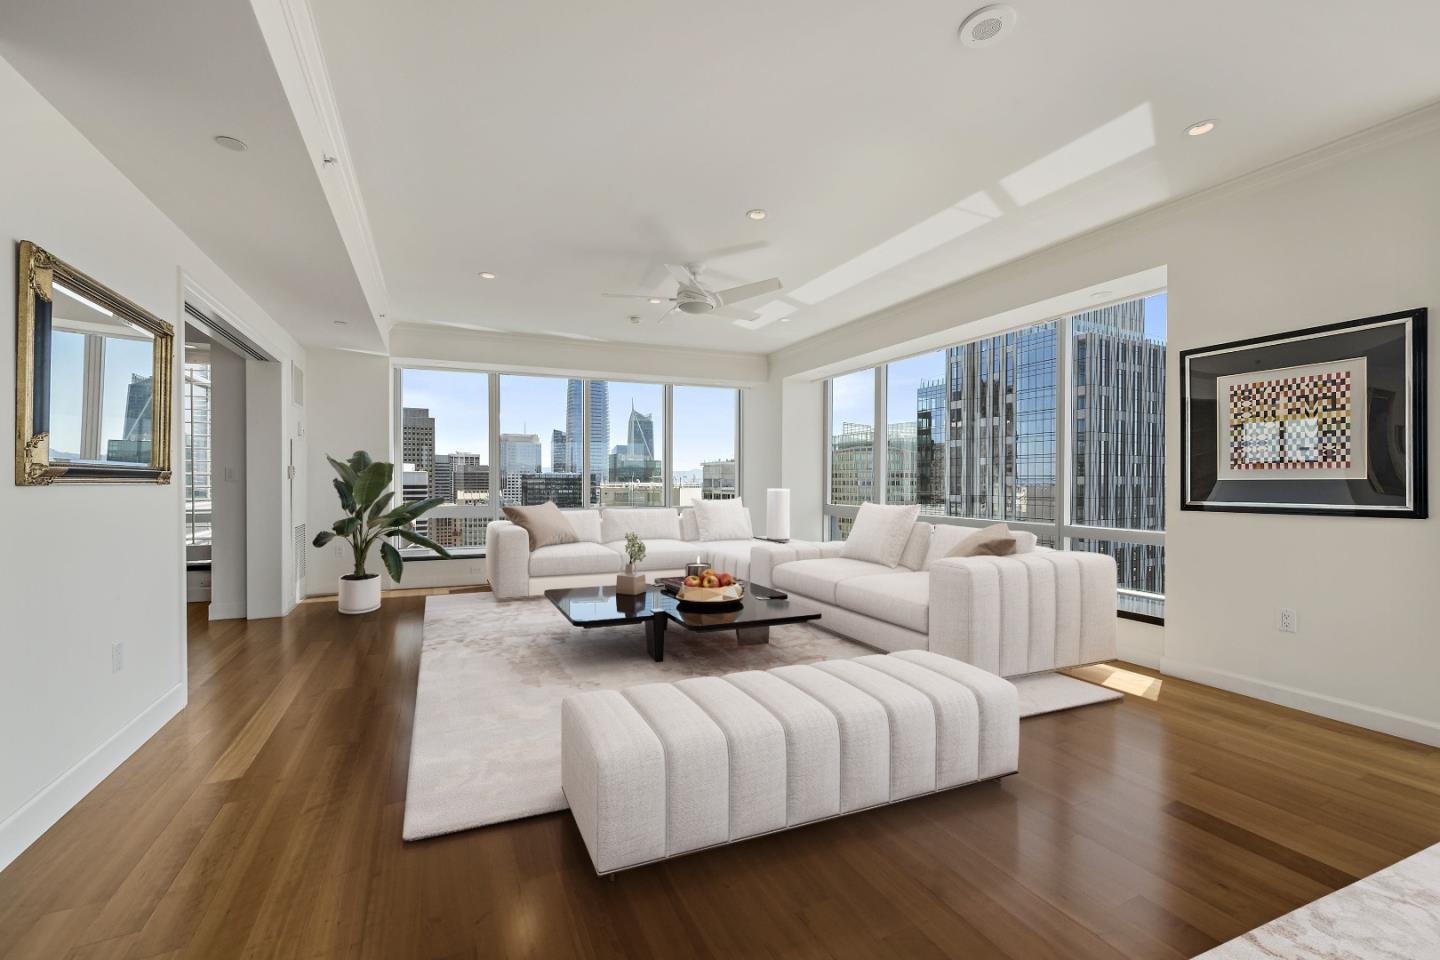 This unique, ultra-spacious penthouse is a Four Seasons Residence, renowned for luxury amenities and service. One of the largest in the building, this one-level condominium spans more than 4,300 square feet with 270-degree unique city views. A private, 24-hour concierge service with three private entrances from the hallway allowing ultra-convenience for guests or staff. The open design is wrapped with breathtaking views with ceilings that delineate spaces for lounging and dining extending from the open gourmet kitchen. A dedicated office and built-in maple cabinetry with matching desk. Primary suite includes a granite-finished steam room, marble bath with heated floor, and air jet tub. A junior suite with studio design integrates a kitchen with cooking facilities and private lobby entrance. There are two deeded parking spaces. This Four Seasons residence has five-star amenities which include access to an onsite Equinox Fitness Center and MKT Restaurant.